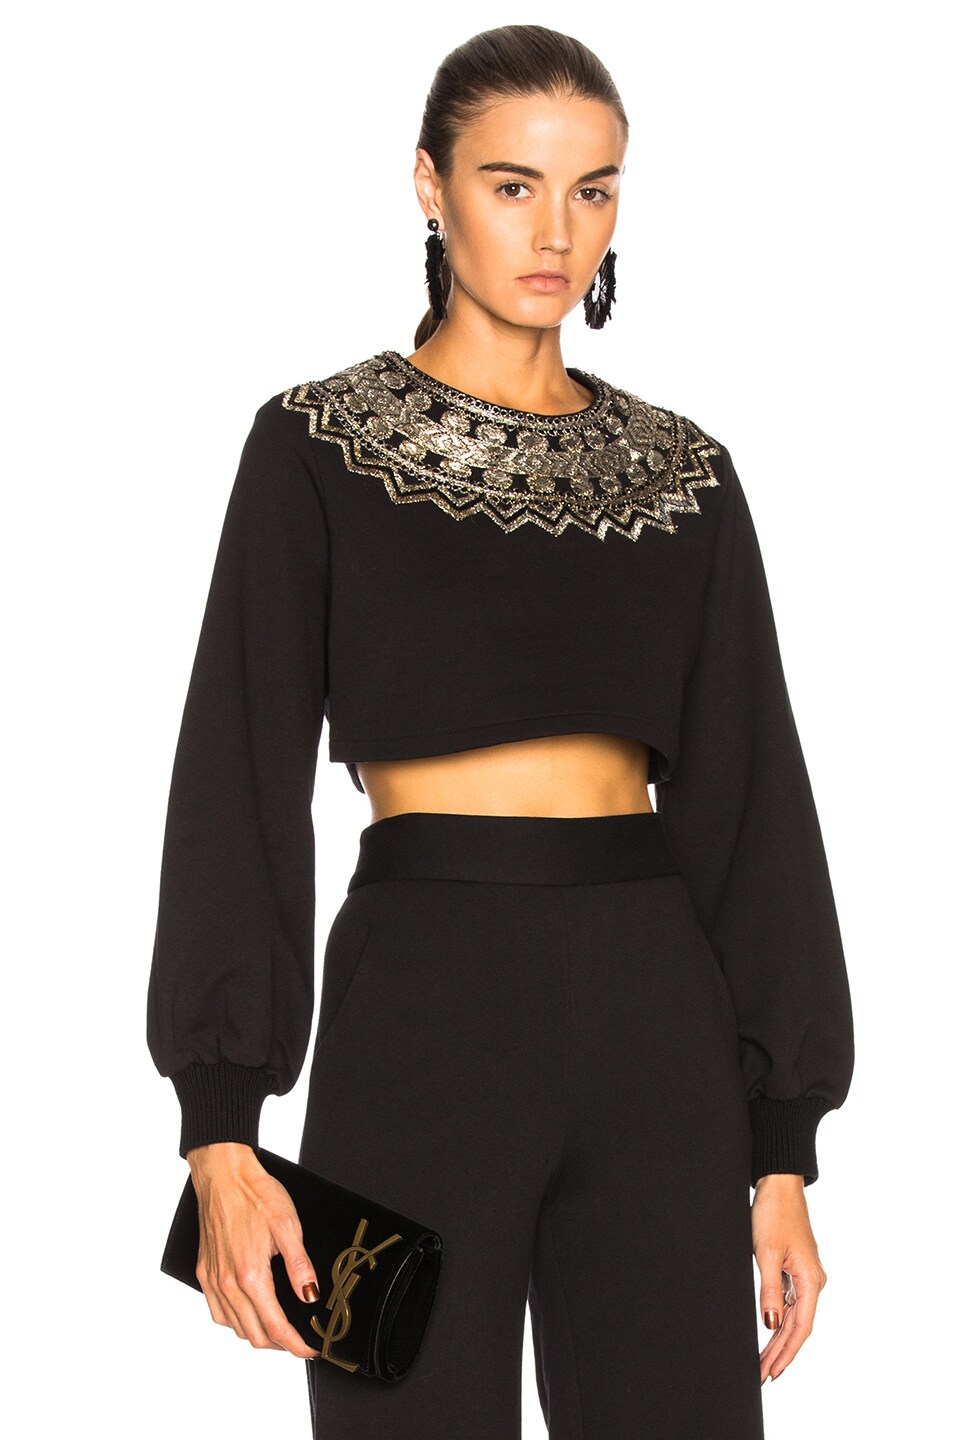 Sally Lapointe Cropped Metallic Embroidered Sweatshirt in Black | FWRD